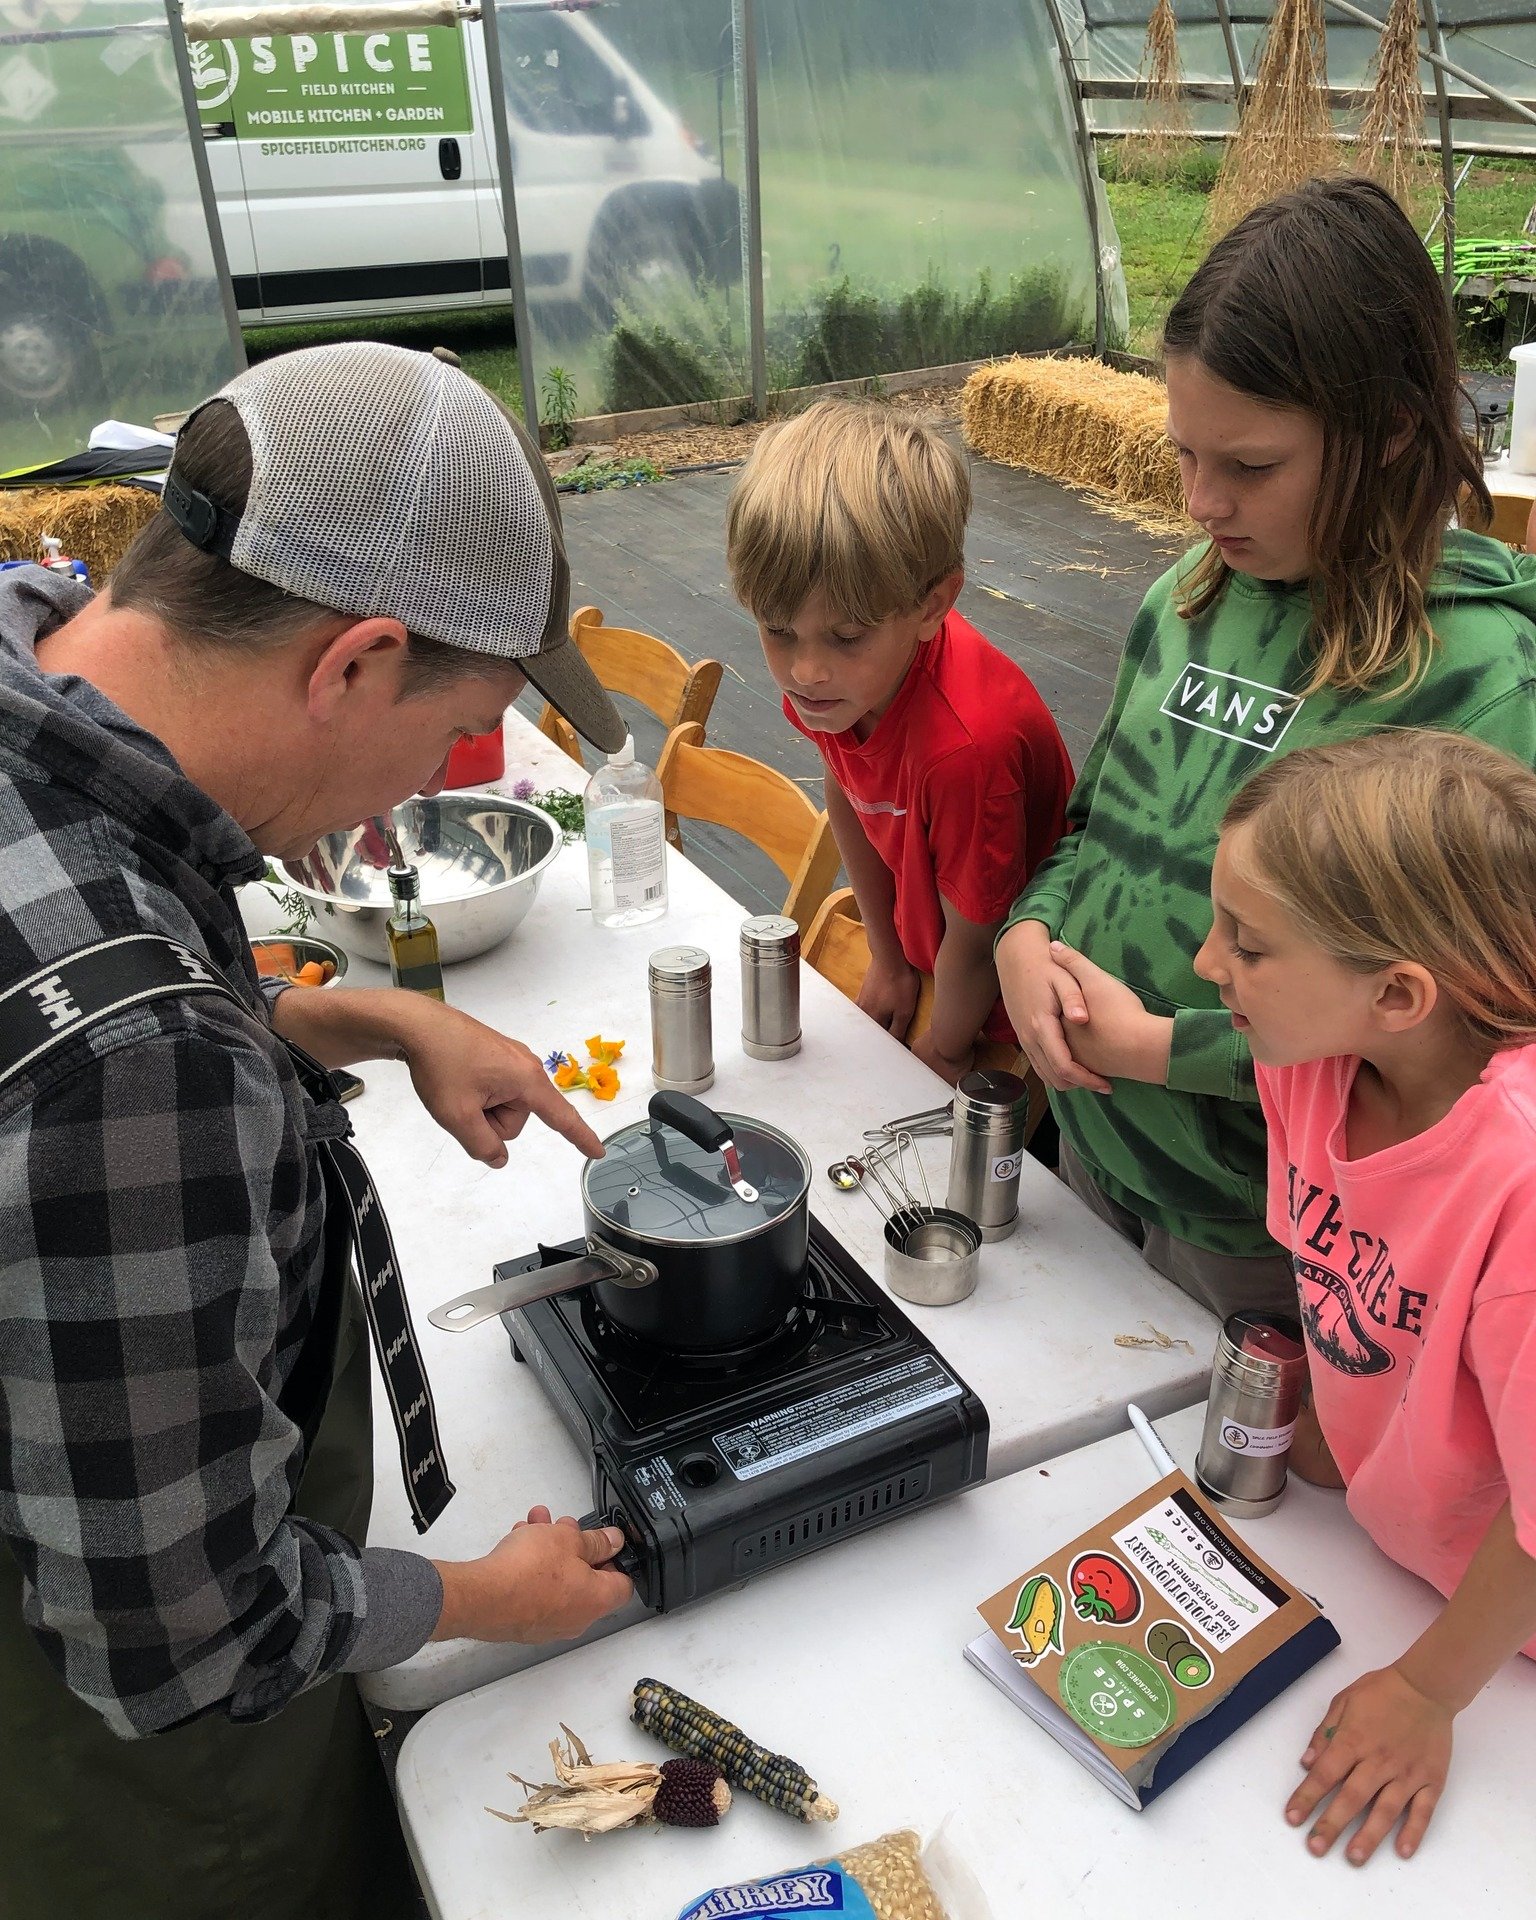 Don't just watch...learn how and practice doing it yourself! That's #revolutionaryfoodengagement!

At Veggie Adventure Camp, we empower our campers to plant, harvest, and cook their own veggie (and fruit)-rich snacks! 

Our 4th-7th grade campers will